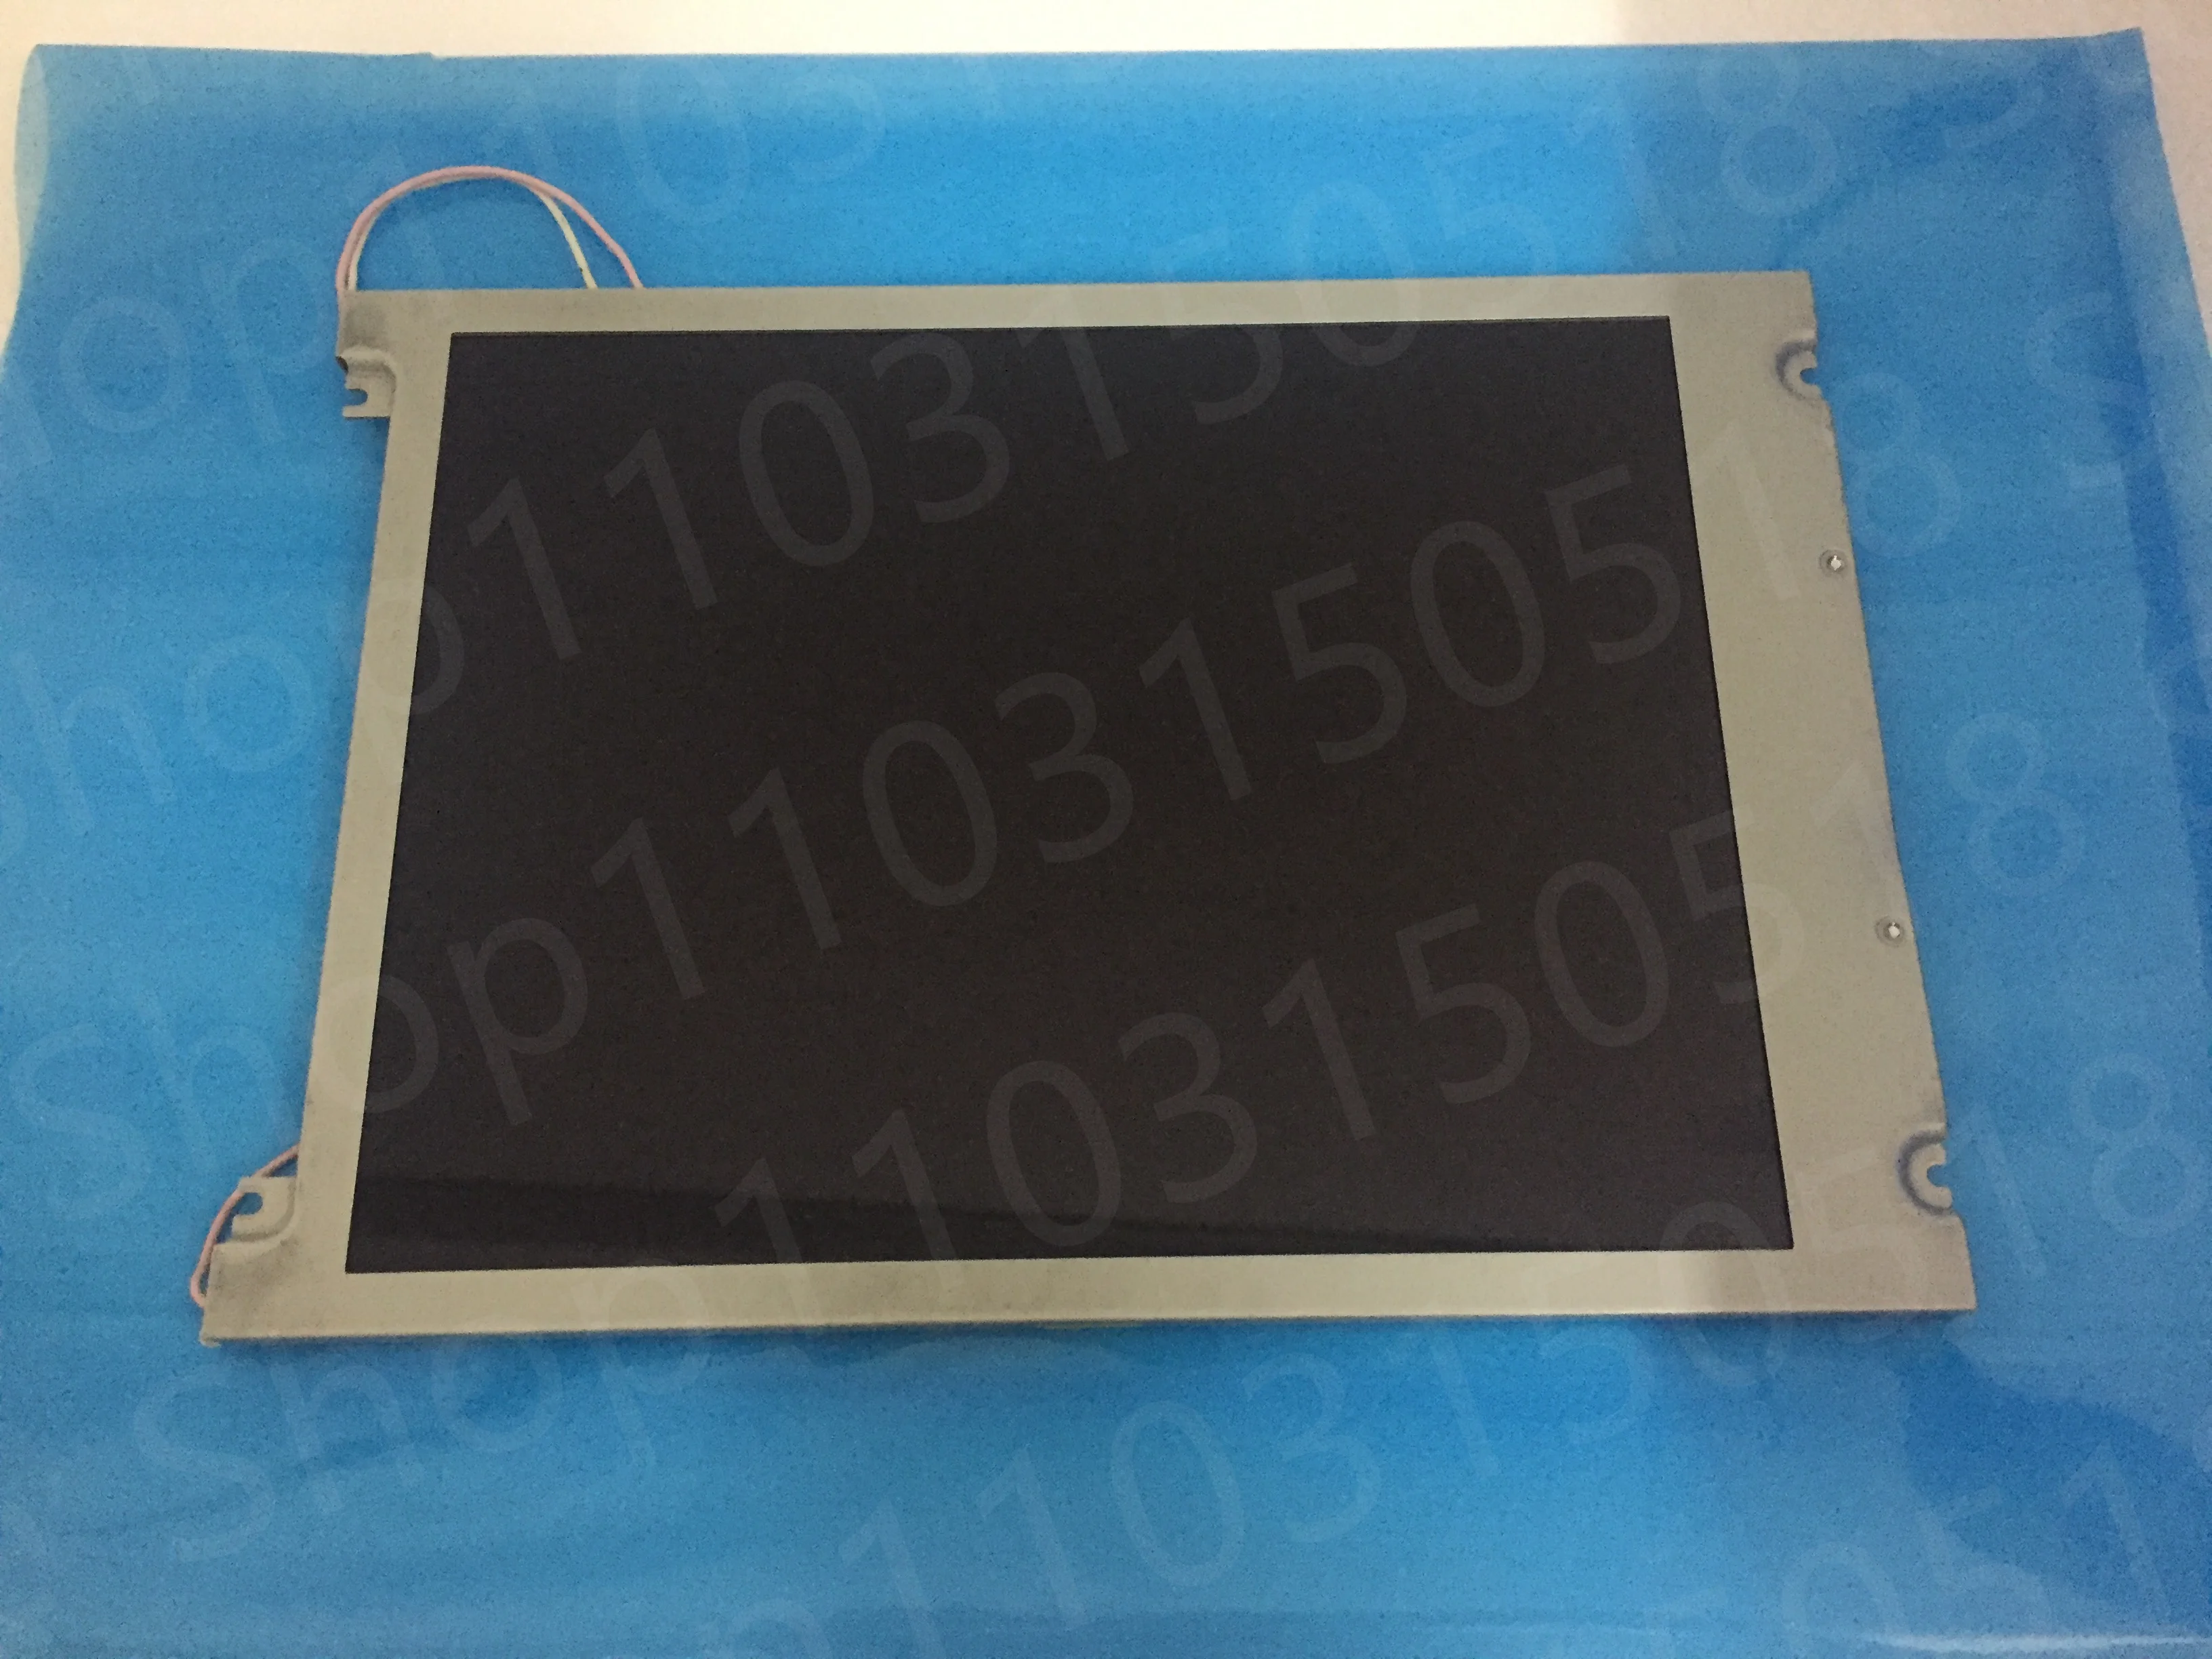 

Original brand KCB104VG2CG-G20 640*480 10.4 inch LCD display screen module panel, fast delivery